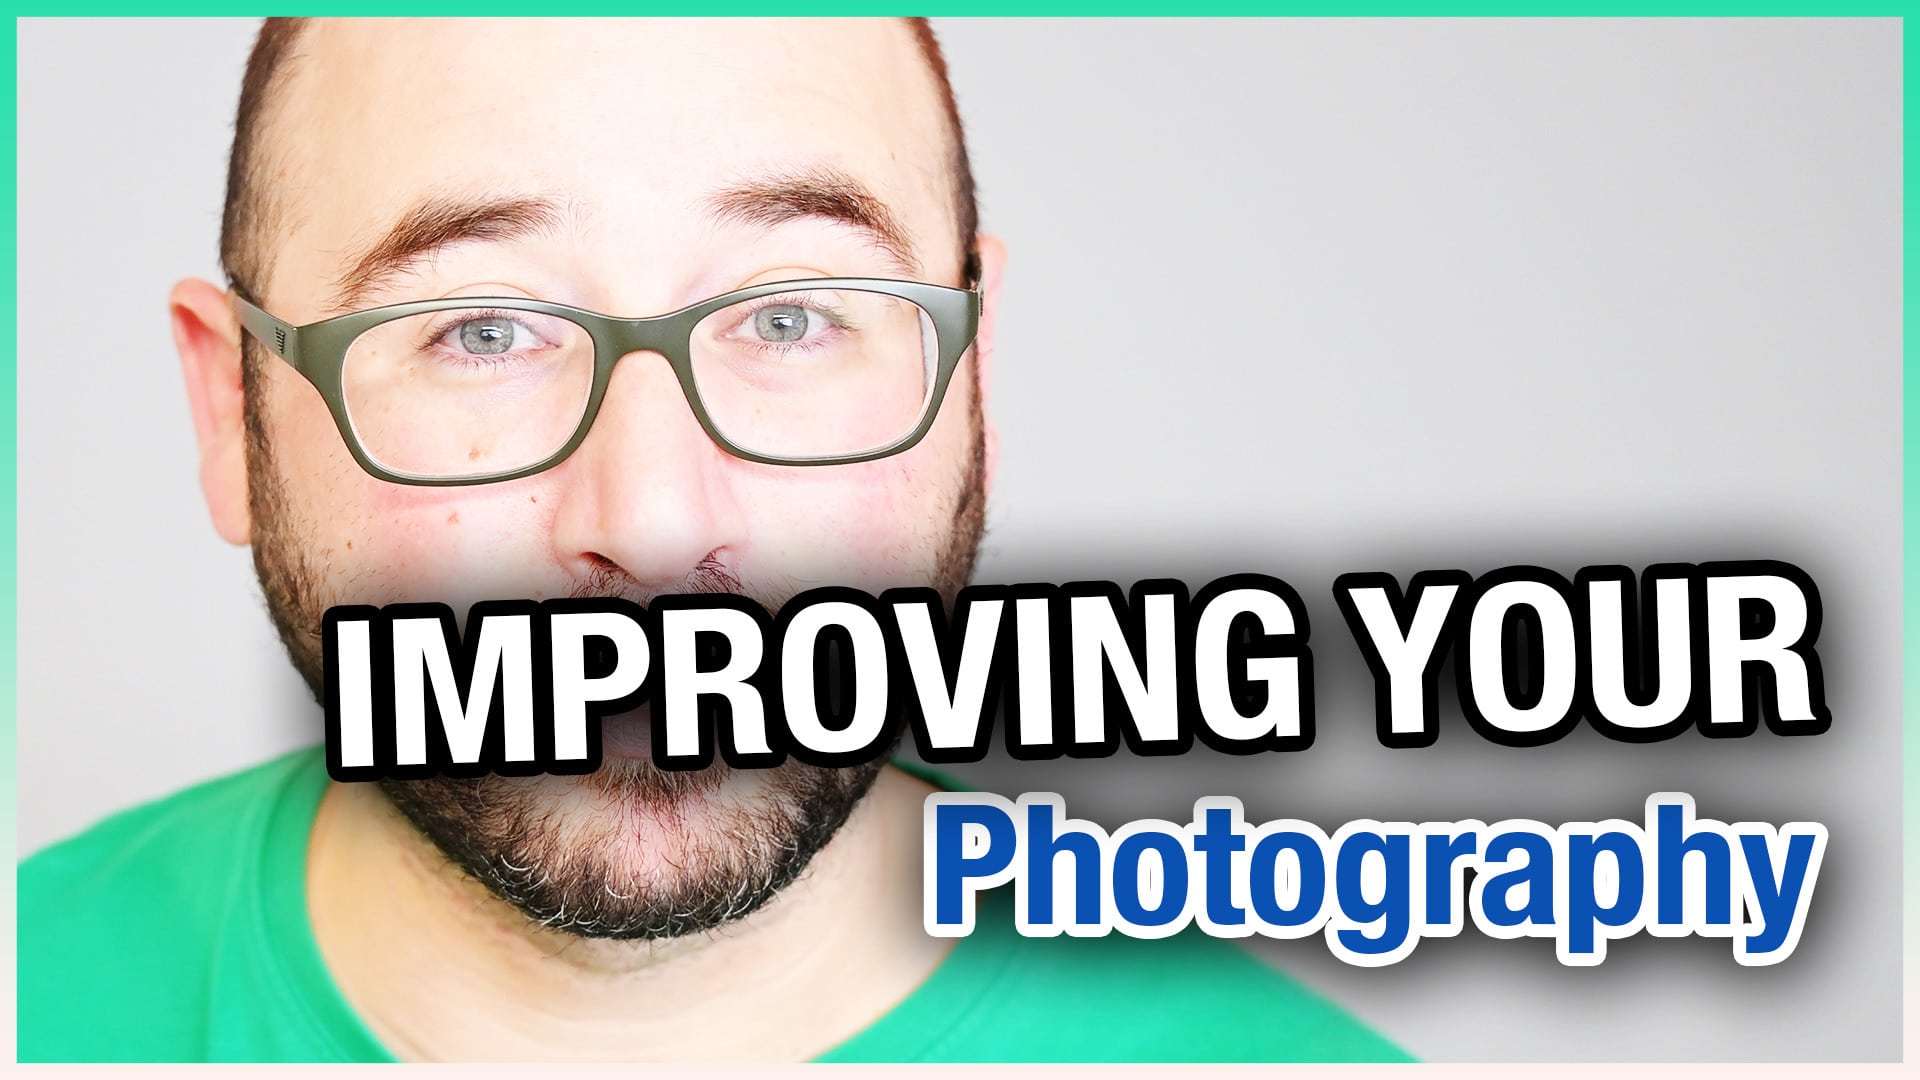 Improving Your Photography - Get Better at Photography